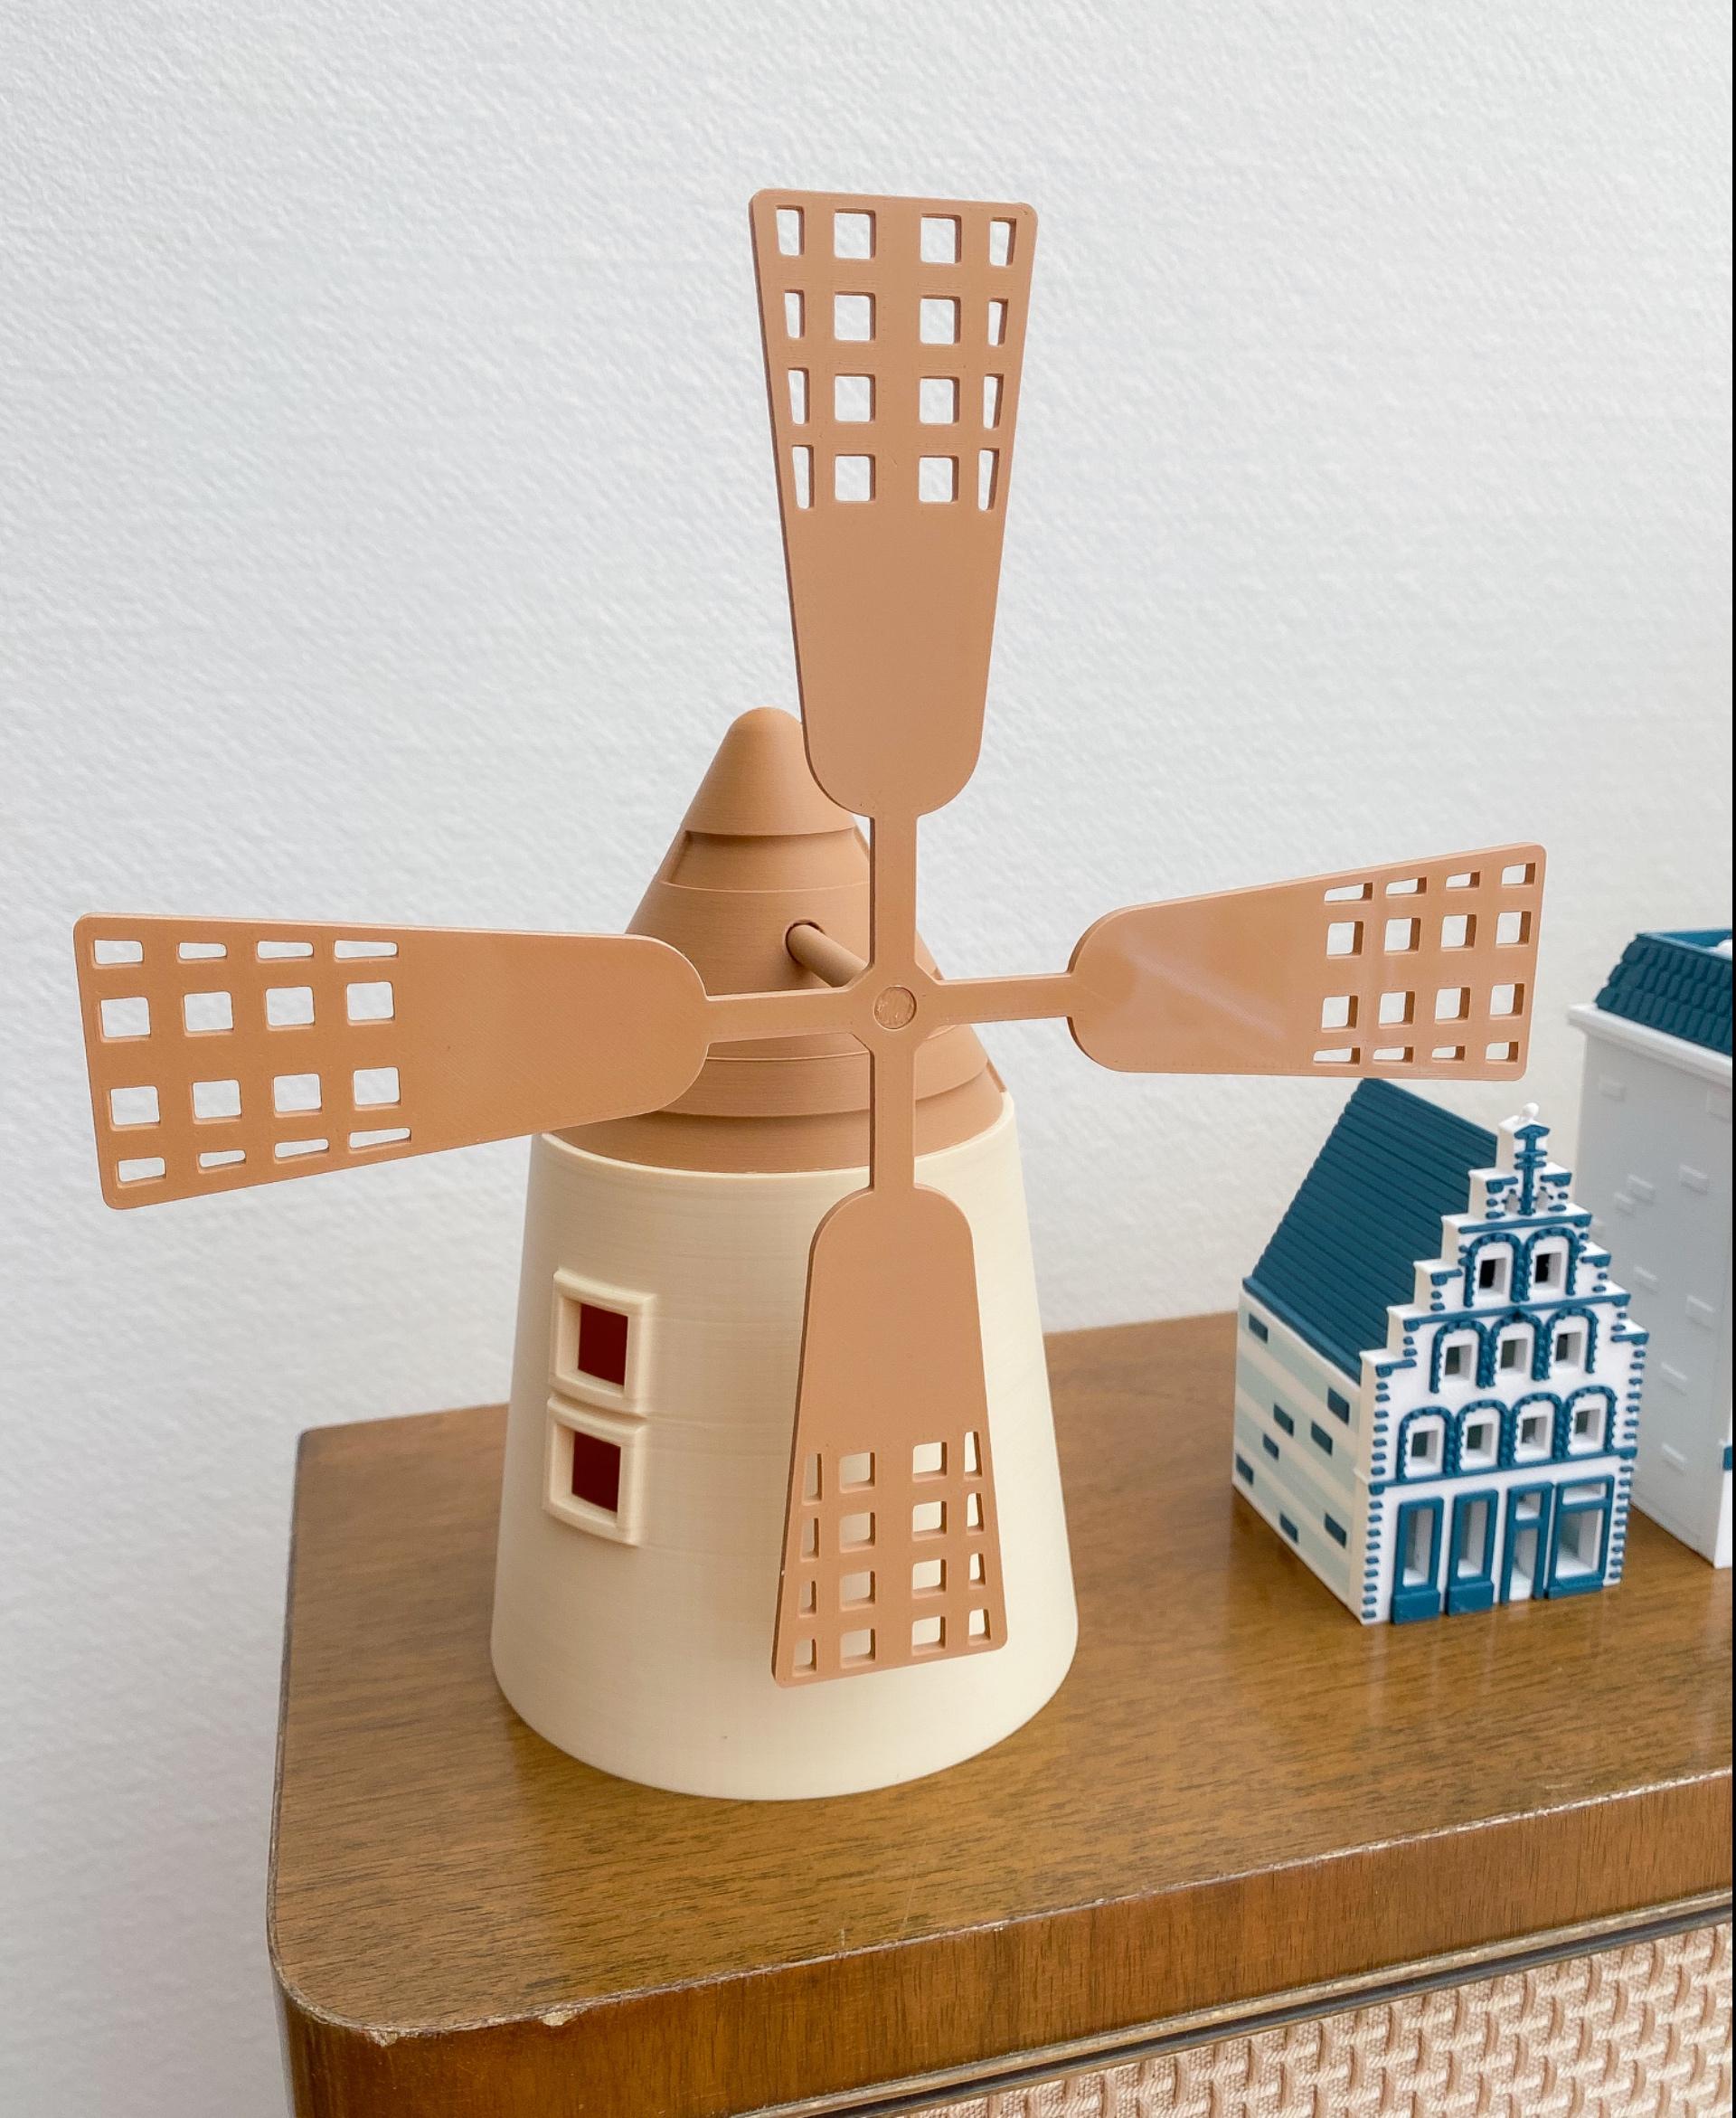 Windmill 1.4 - Check out my first printed beautiful windmill!
All polymaker filament - 3d model